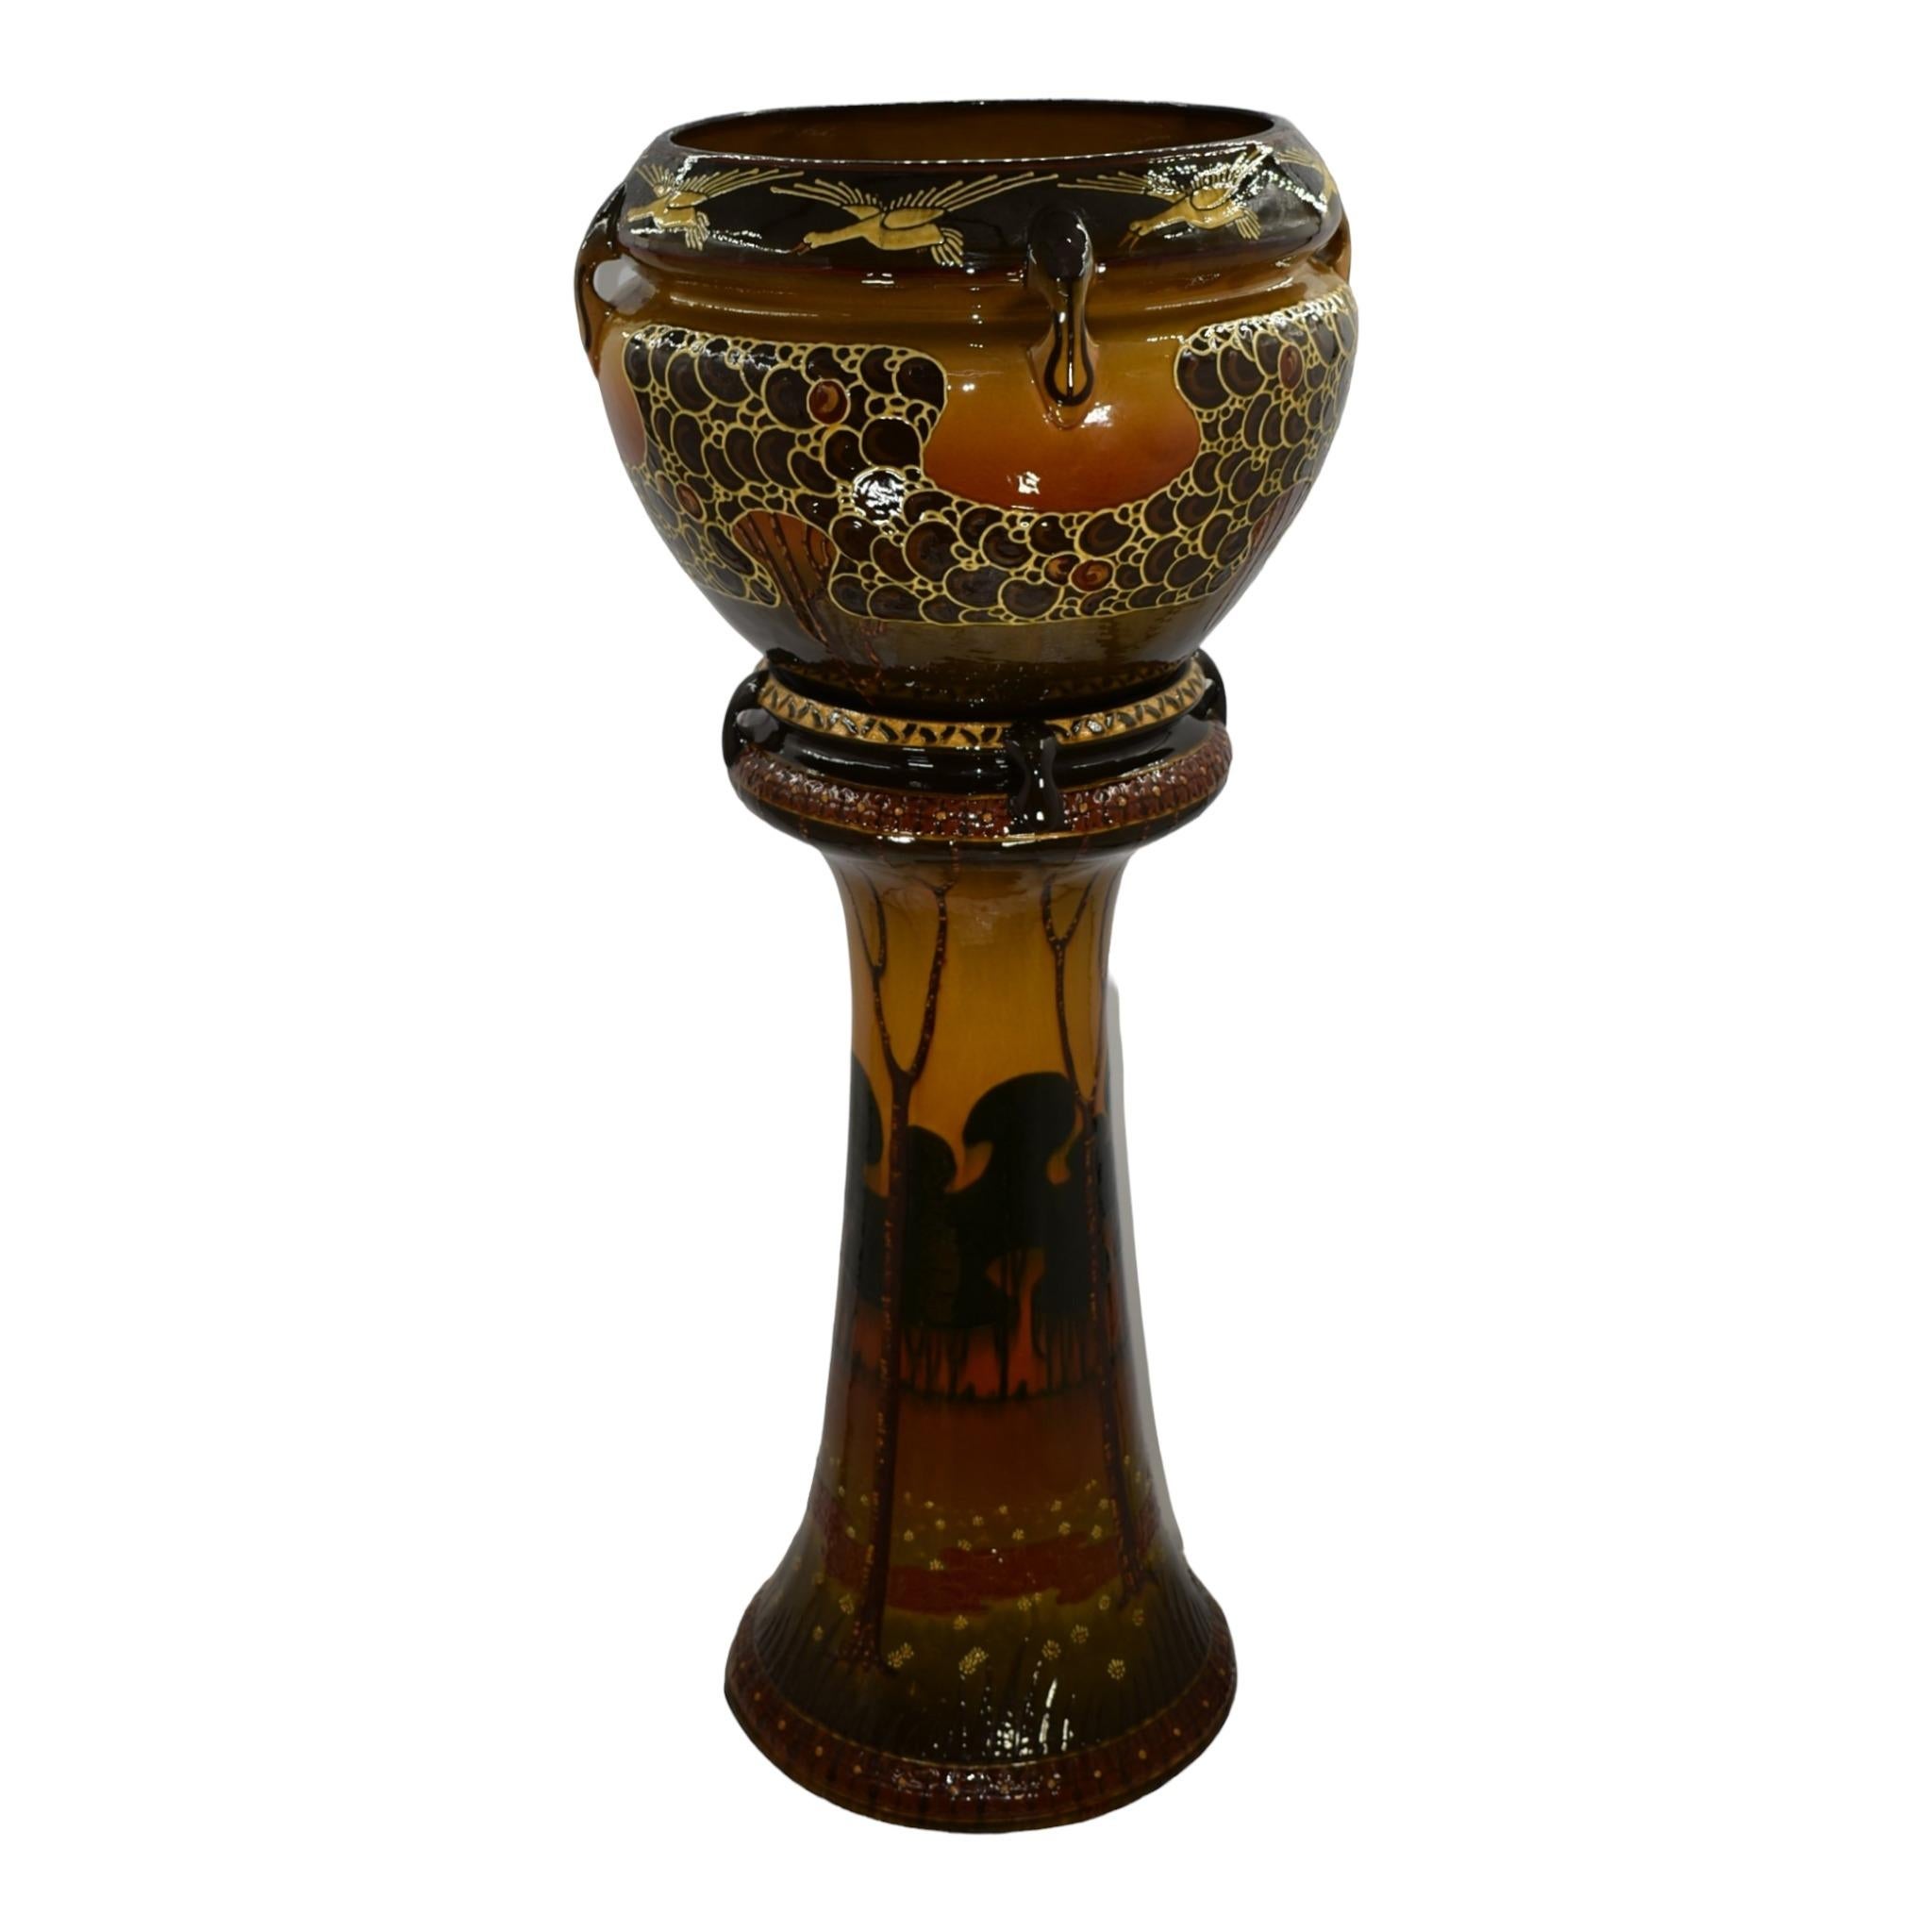 Roseville Decorated Landscape 1907 Pottery Jardiniere and Pedestal 456-14
Massive and rare set with stunning design and super color. 
Exceptional combination of squeezebag, grafitto and hand painted detail to the artwork.
Shows well with just a